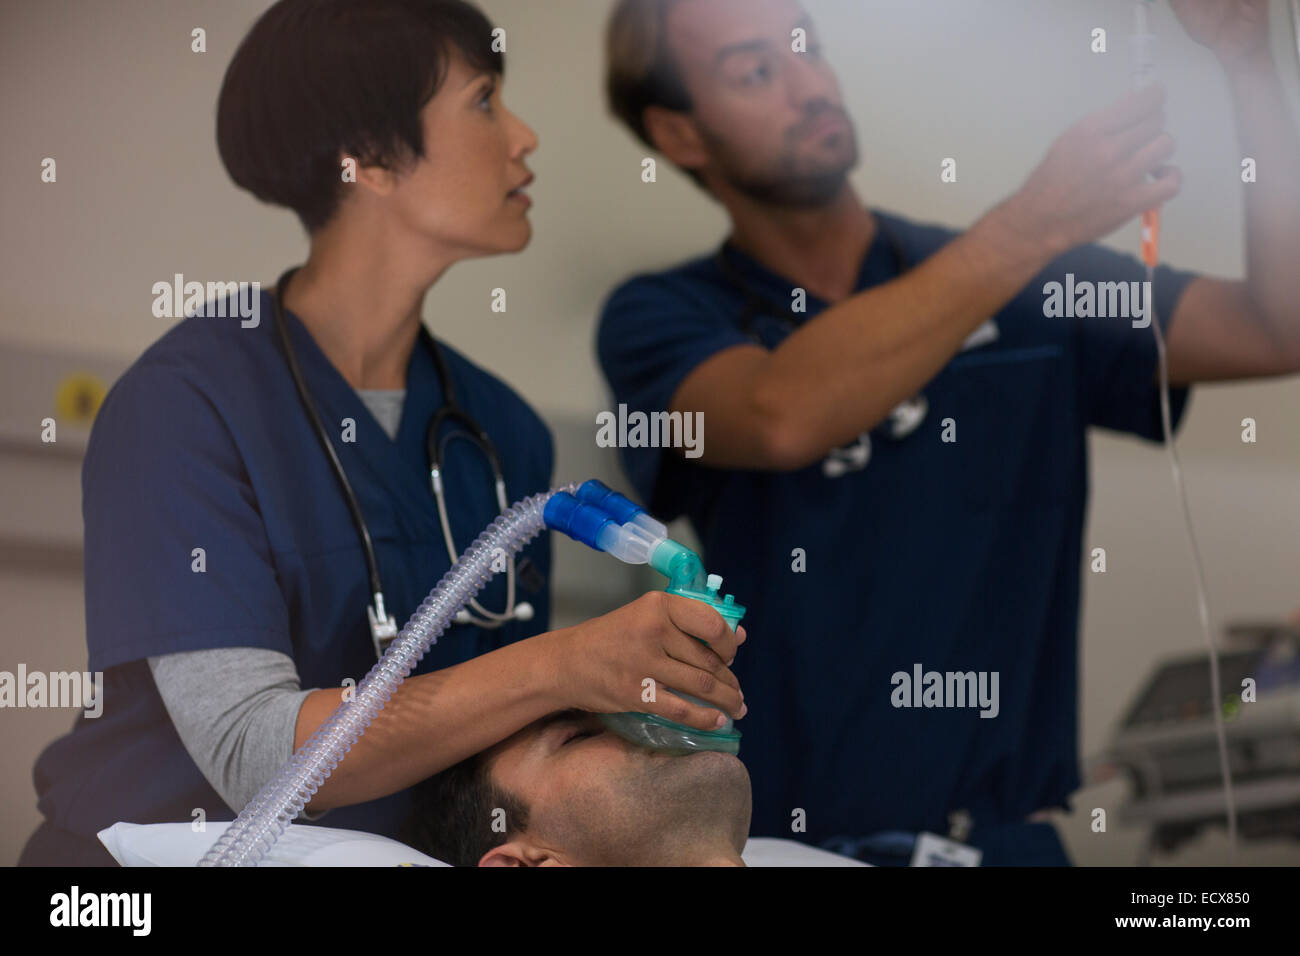 Doctor holding oxygen mask over patient, doctor adjusting IV drip in intensive care unit Stock Photo